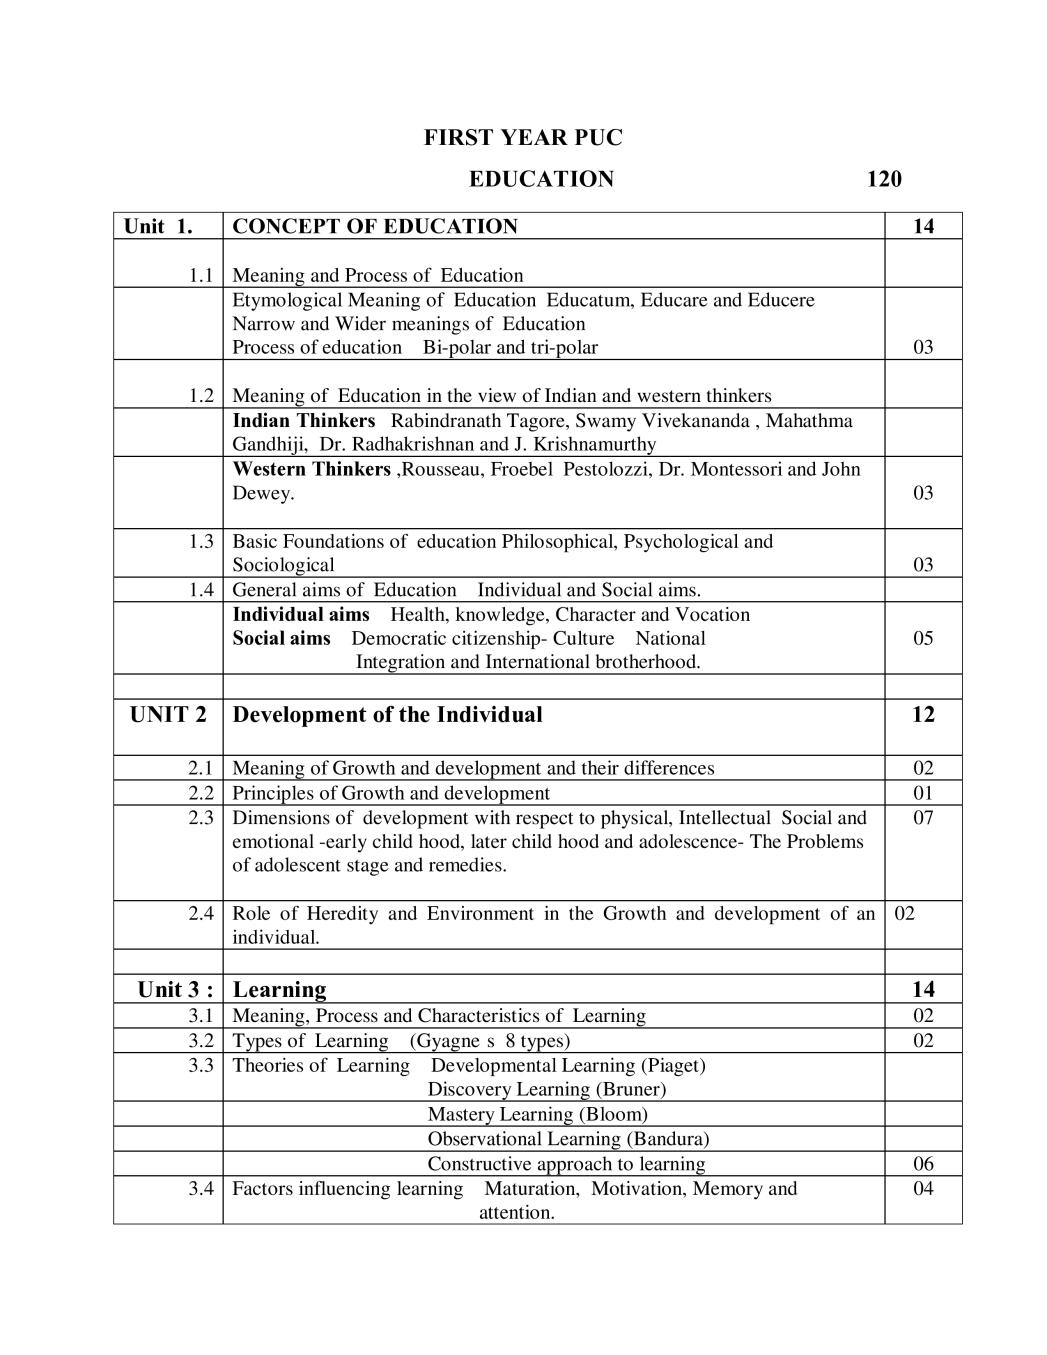 1st PUC Syllabus for Education - Page 1